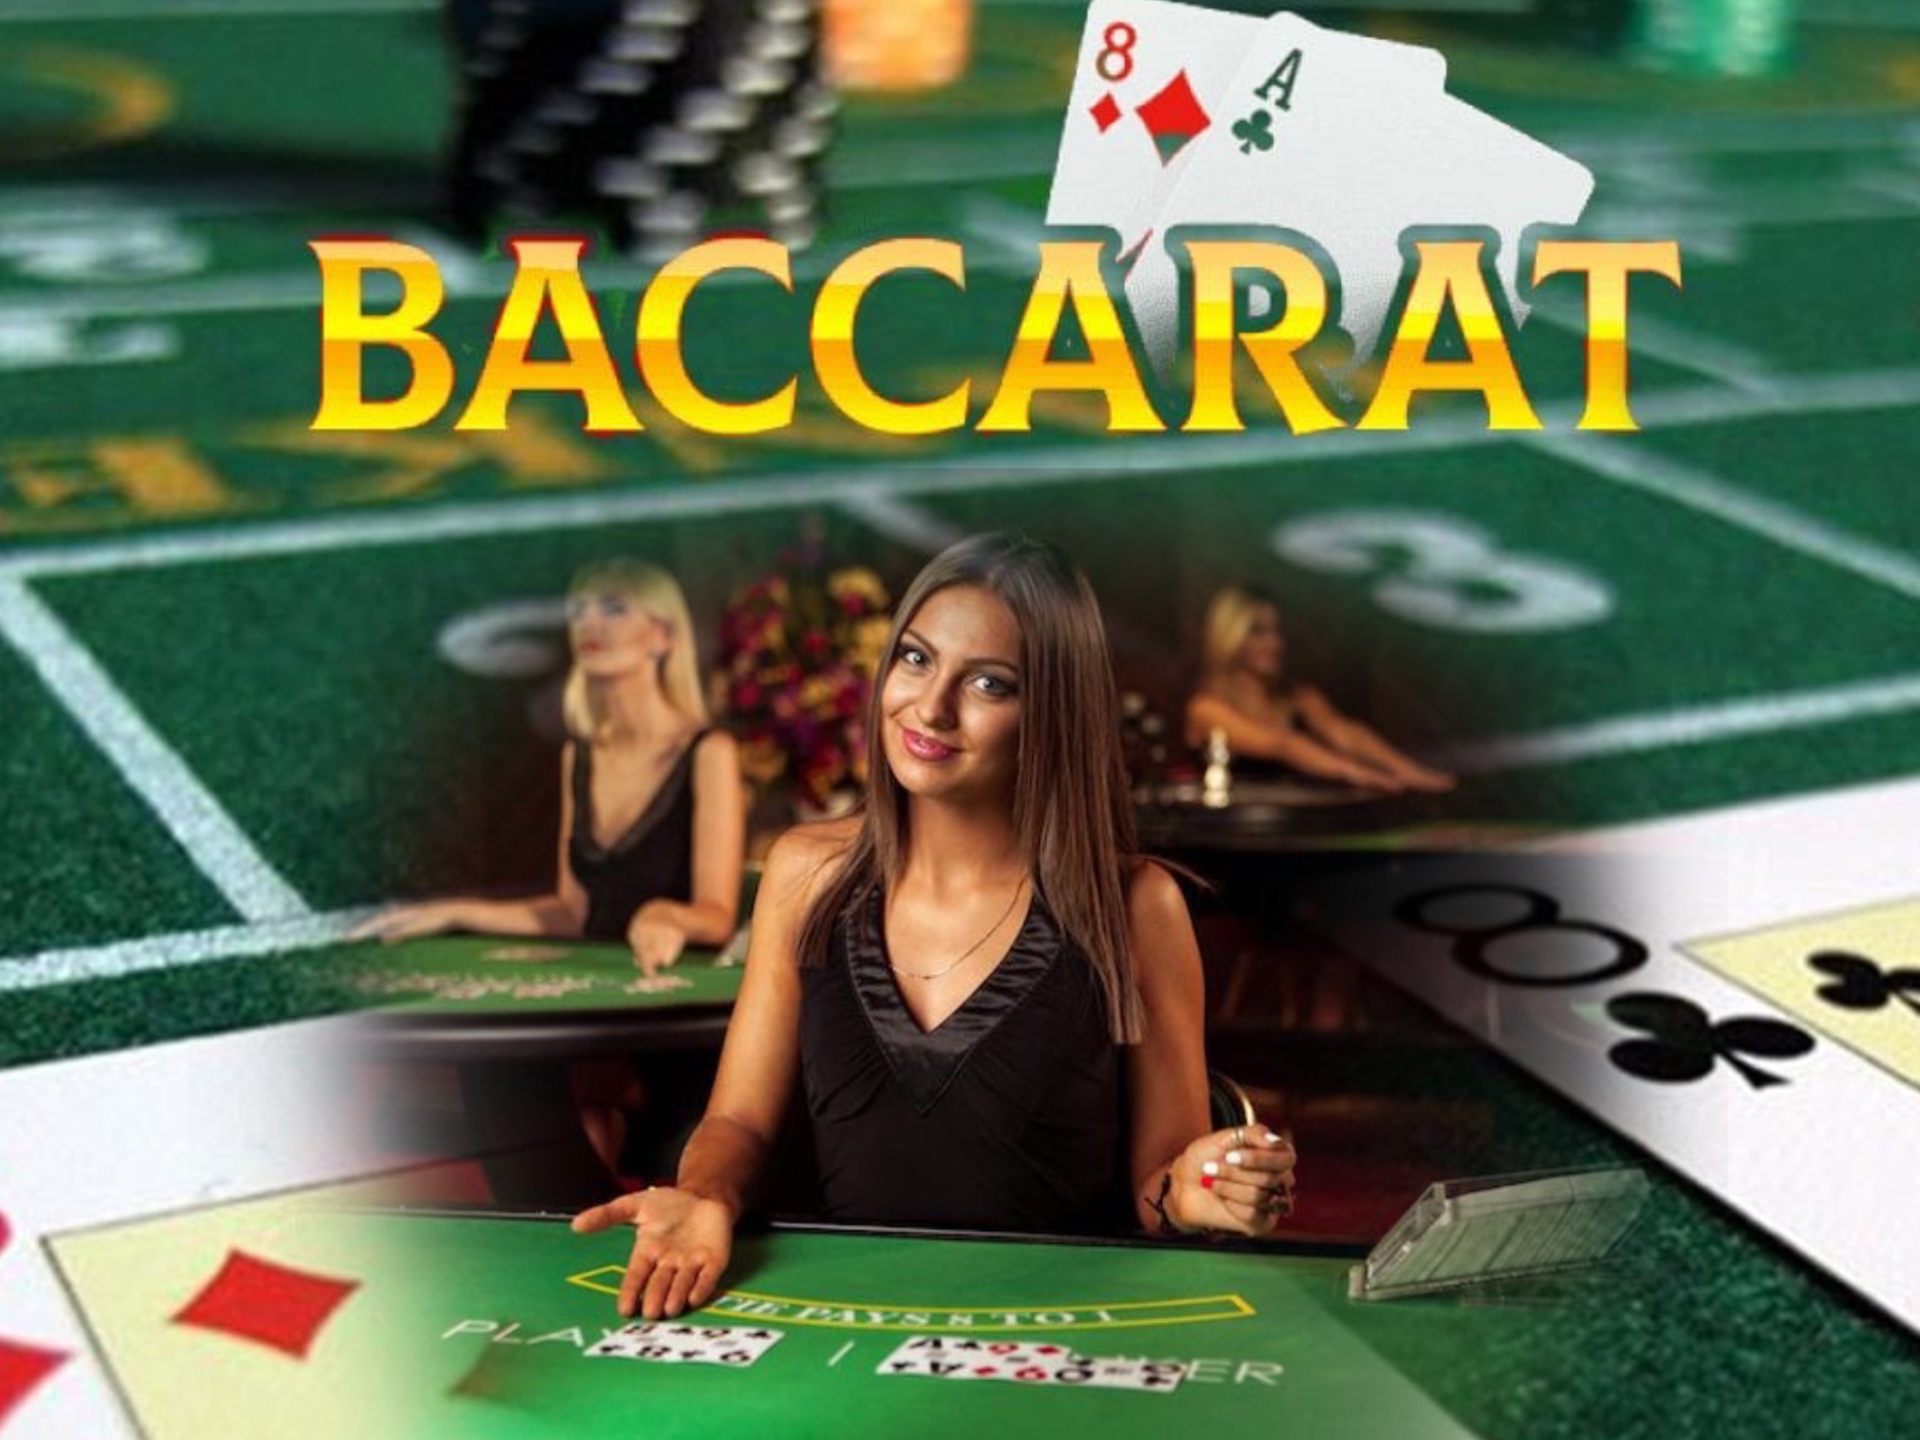 This extraordinary game is available at every modern online casino.